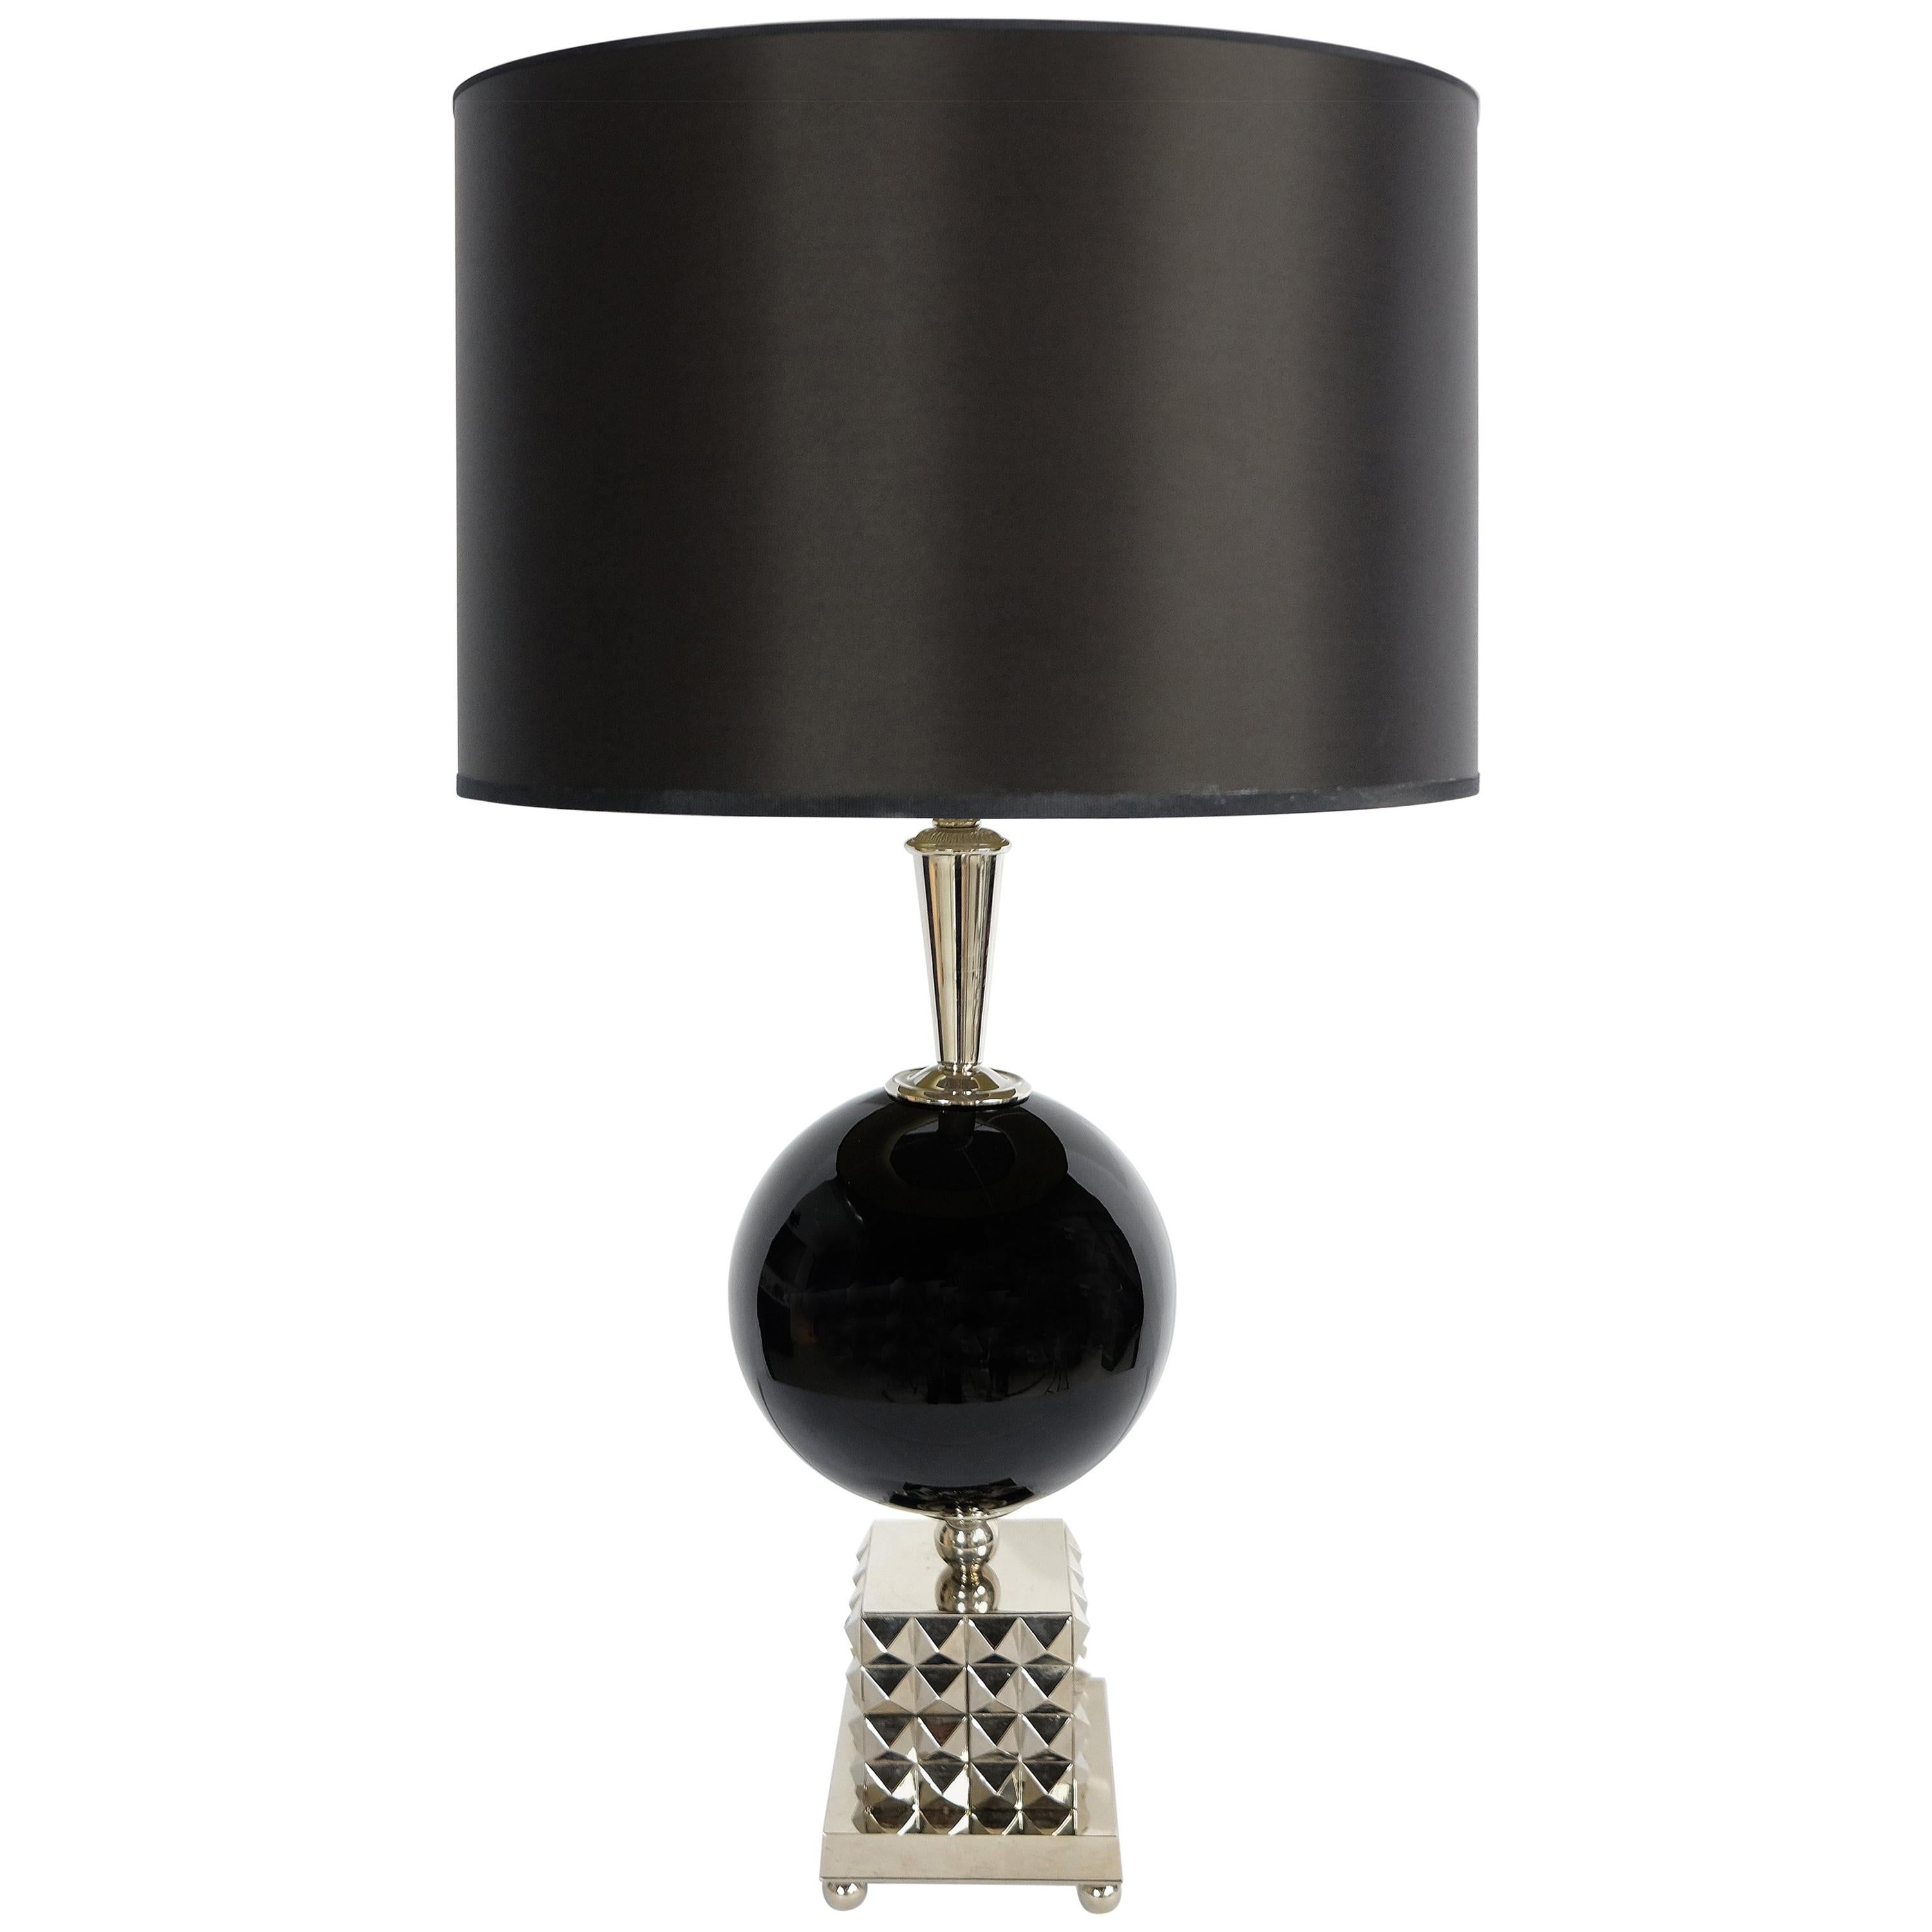 Laudarte Srl Lume Yago Table Lamp in Nickel and Glass, pair Available For Sale